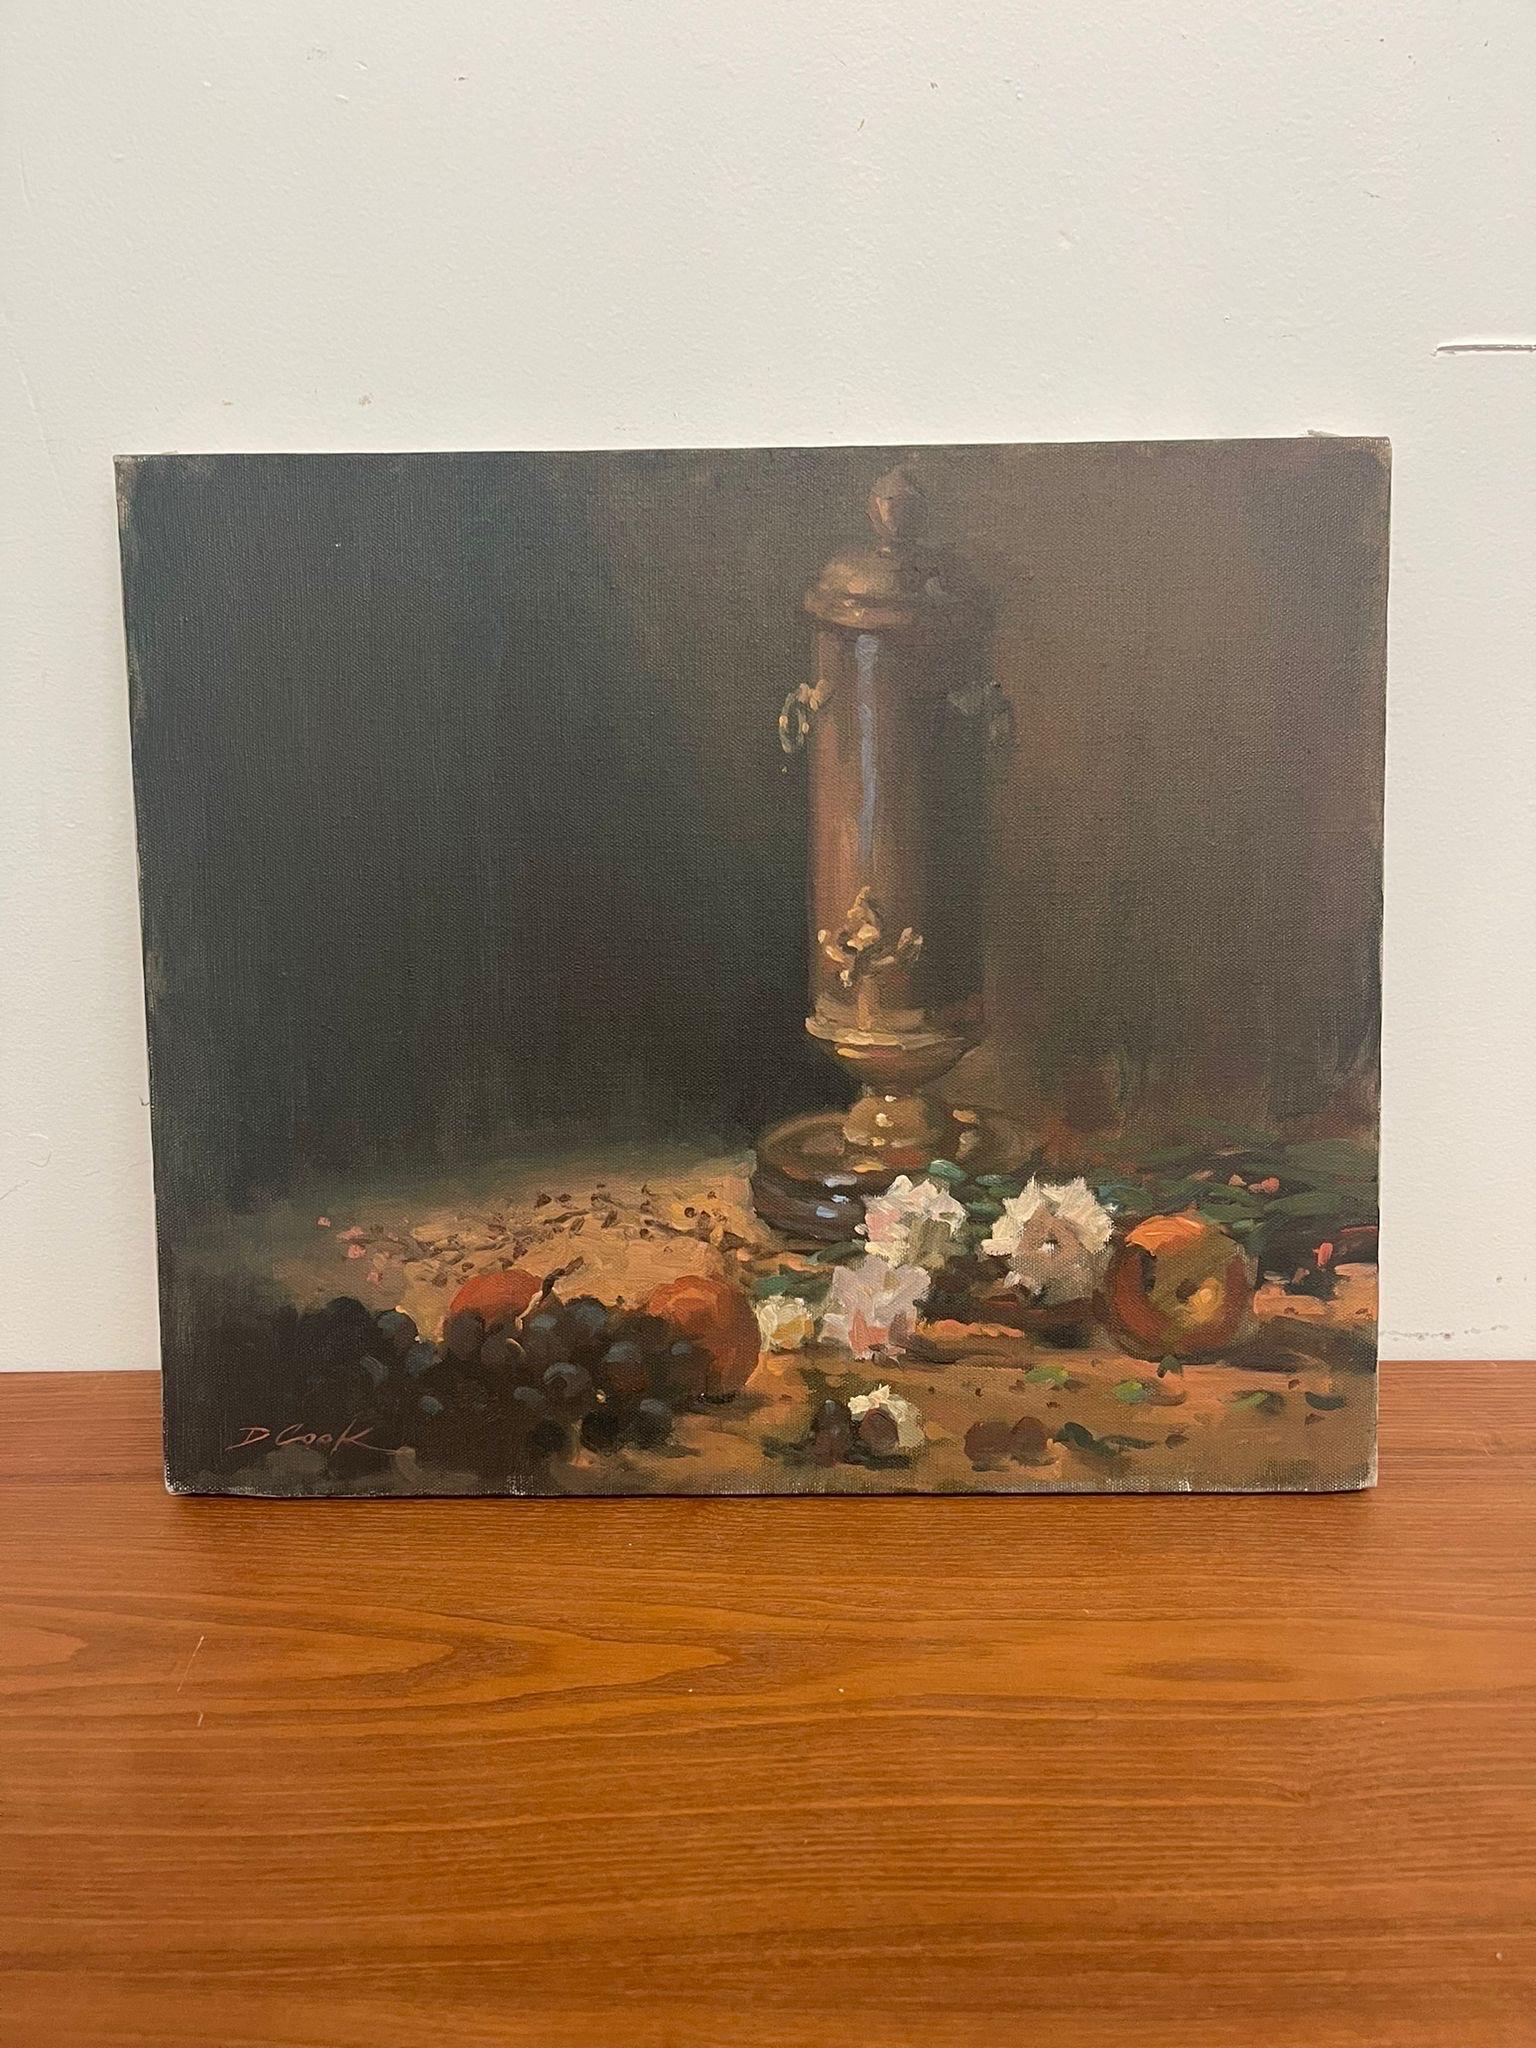 Possibly Acrylic or Oil on Canvas. Sticker on the Back Stating the Painting was Made in the 1980s. Vintage Condition Consistent with Age as Pictured.

Dimensions. 18 W ; 1/2 D ; 15 H